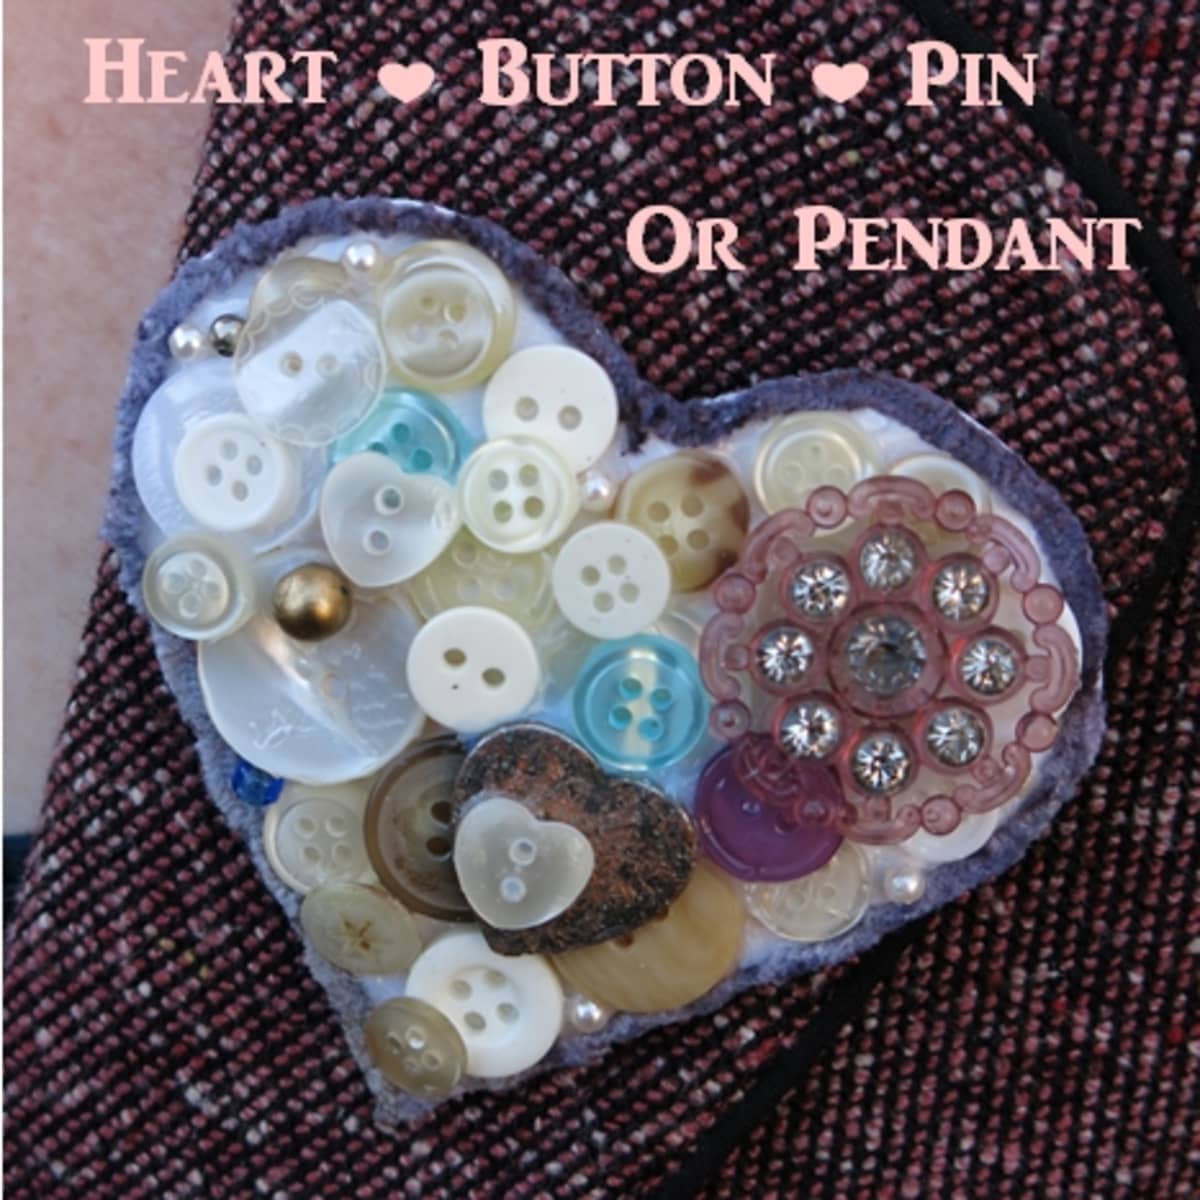 Heart Button Crafts Projects  Heart Shaped Buttons Crafts